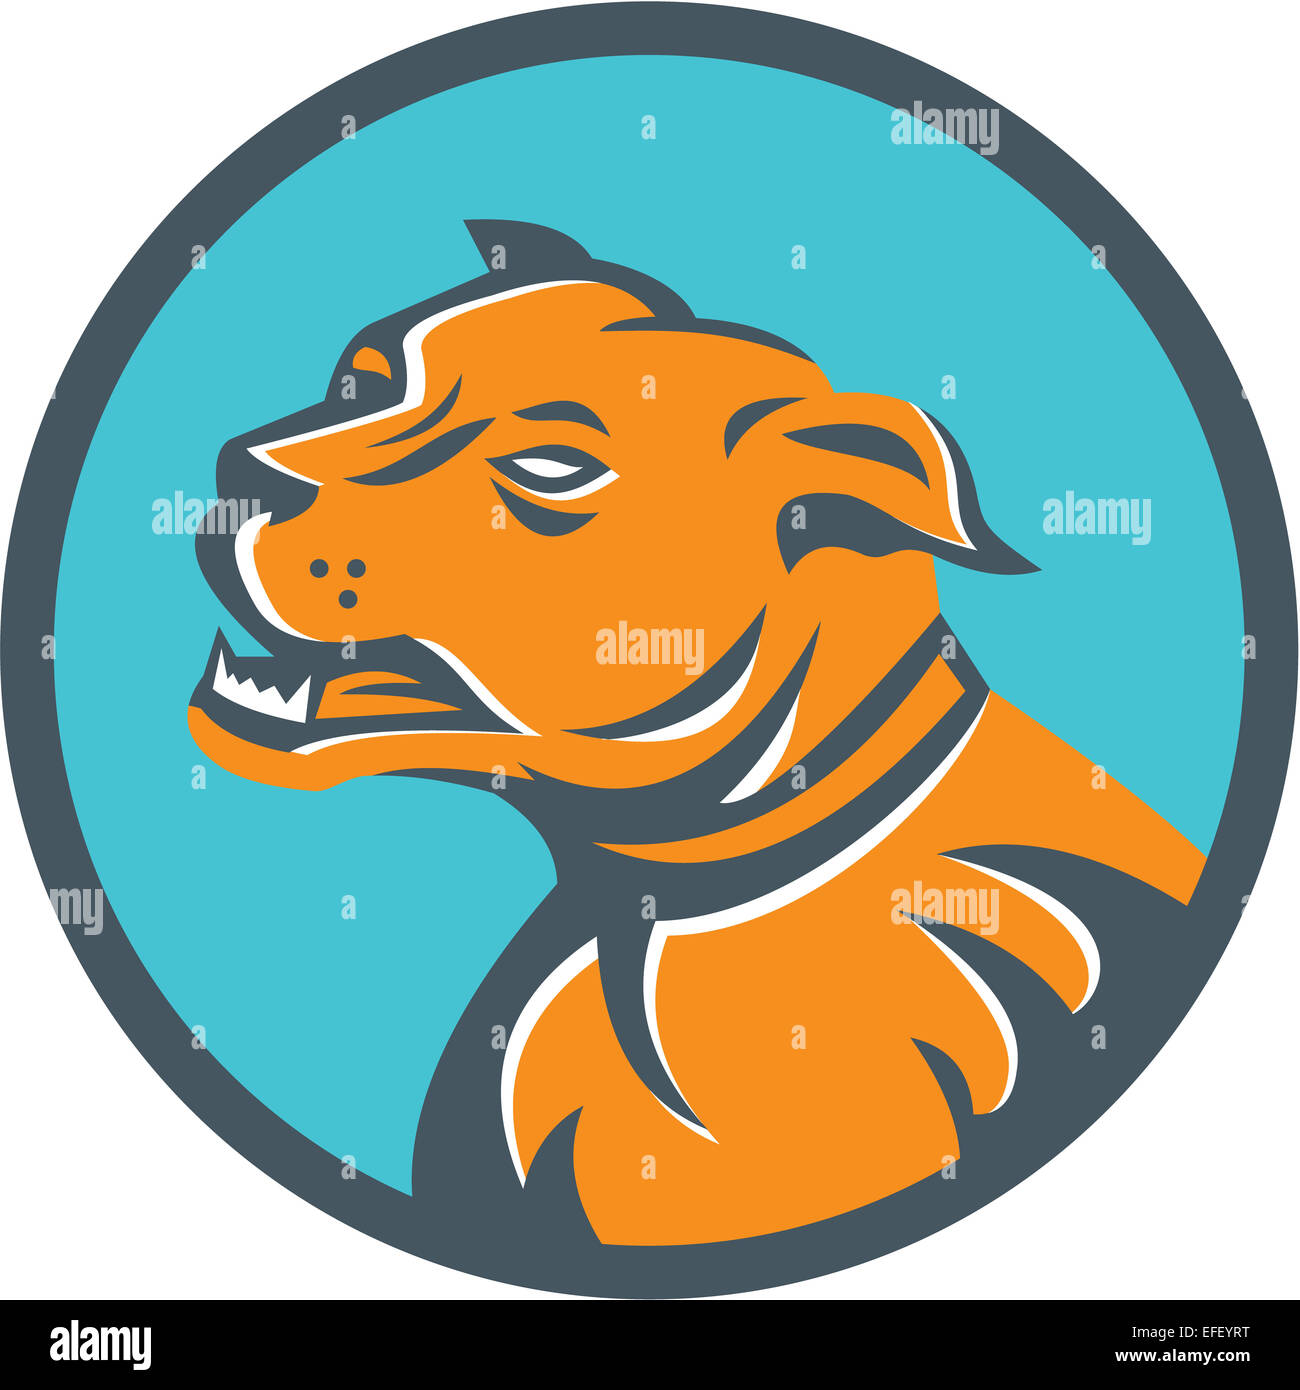 Illustration of an angry mastiff dog mongrel viewed from the side set inside circle on isolated background done in retro style. Stock Photo